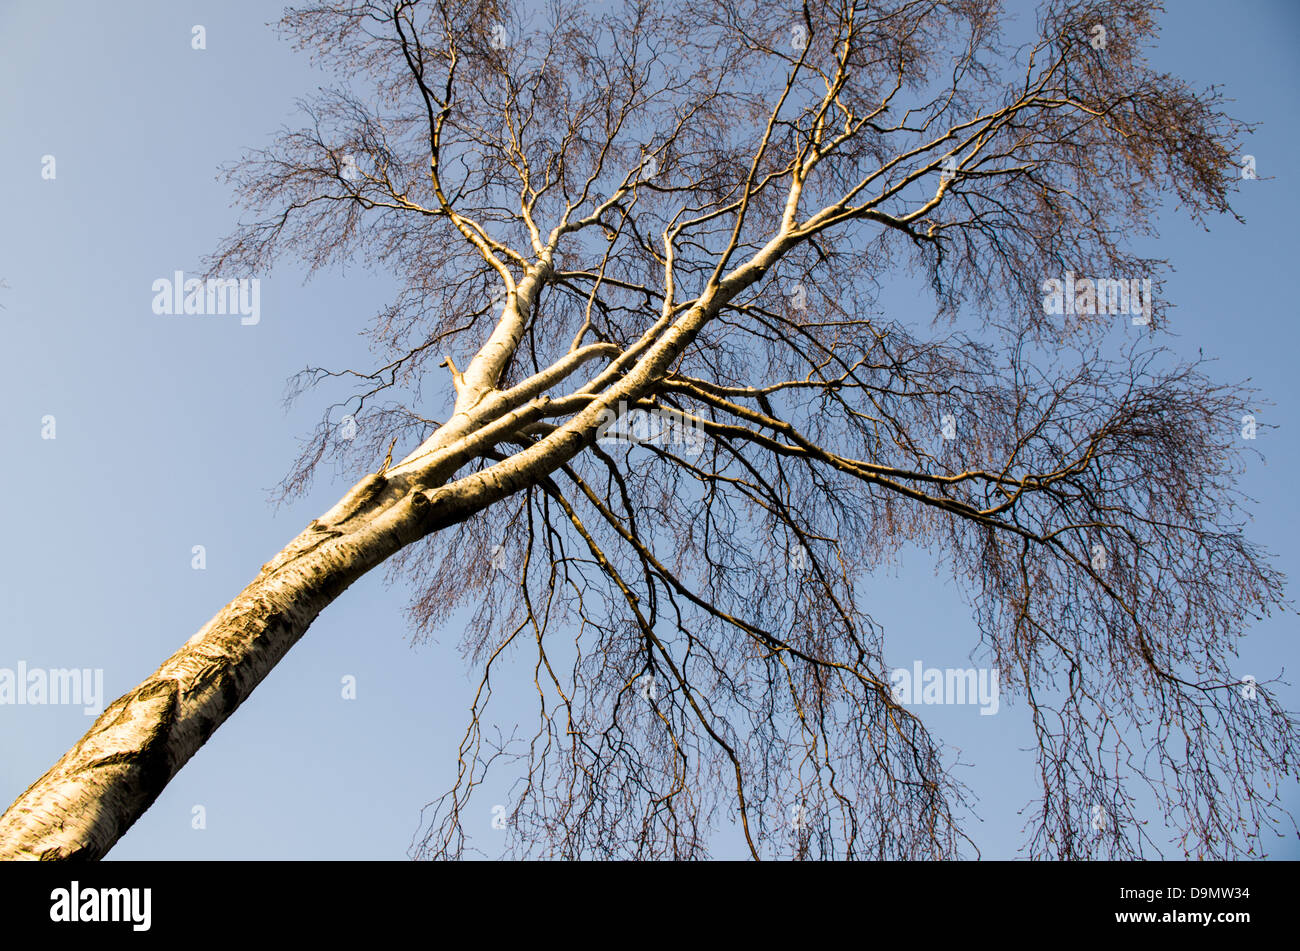 A close-up of a birch tree looking upwards in spring with no foliage. Stock Photo